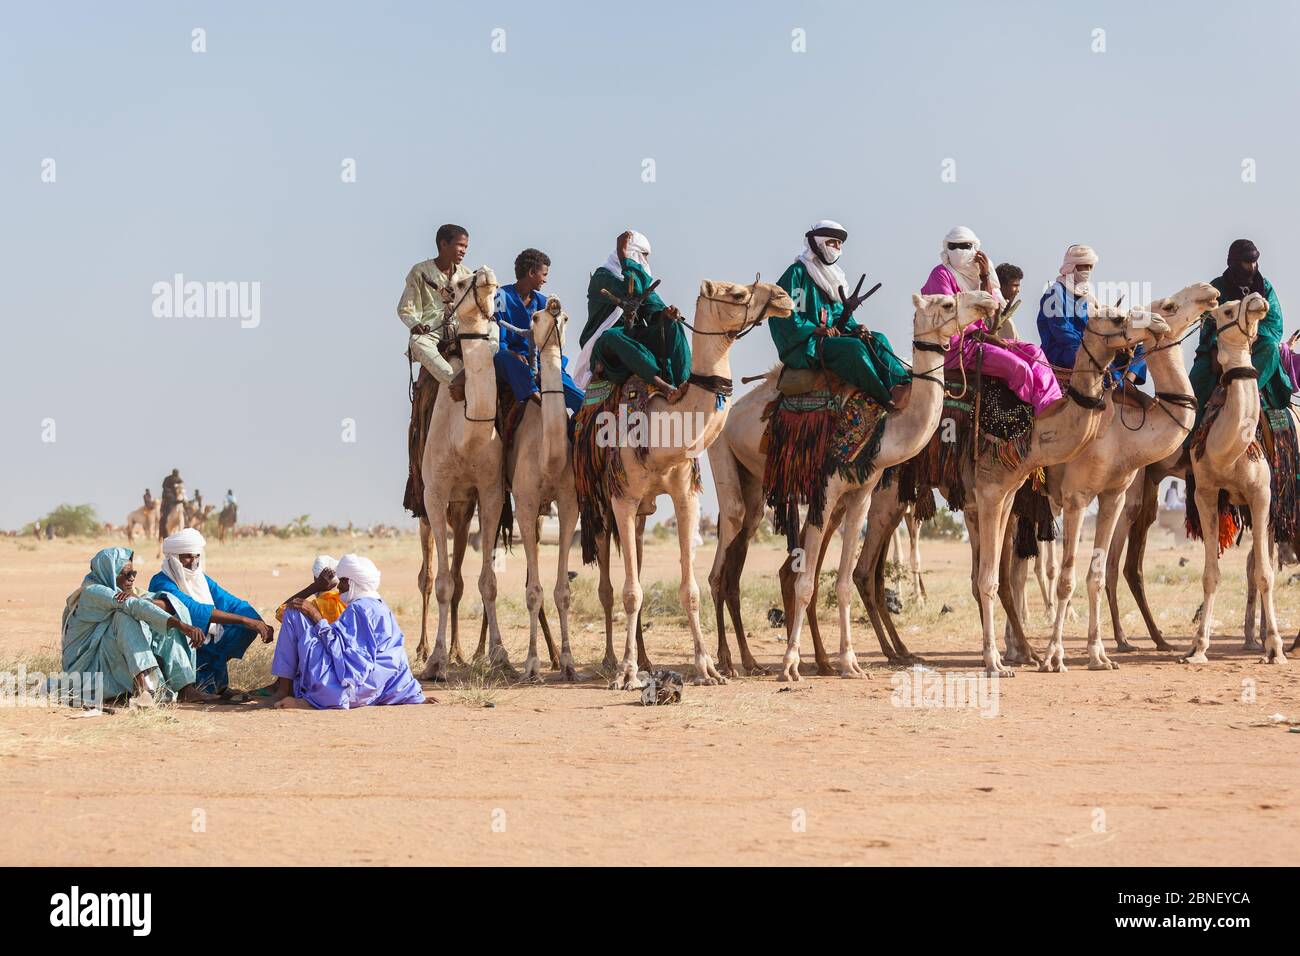 Ingall, Nige Curee Sale festivalr: tuareg people in traditional clothes sitting on camels in desert Stock Photo